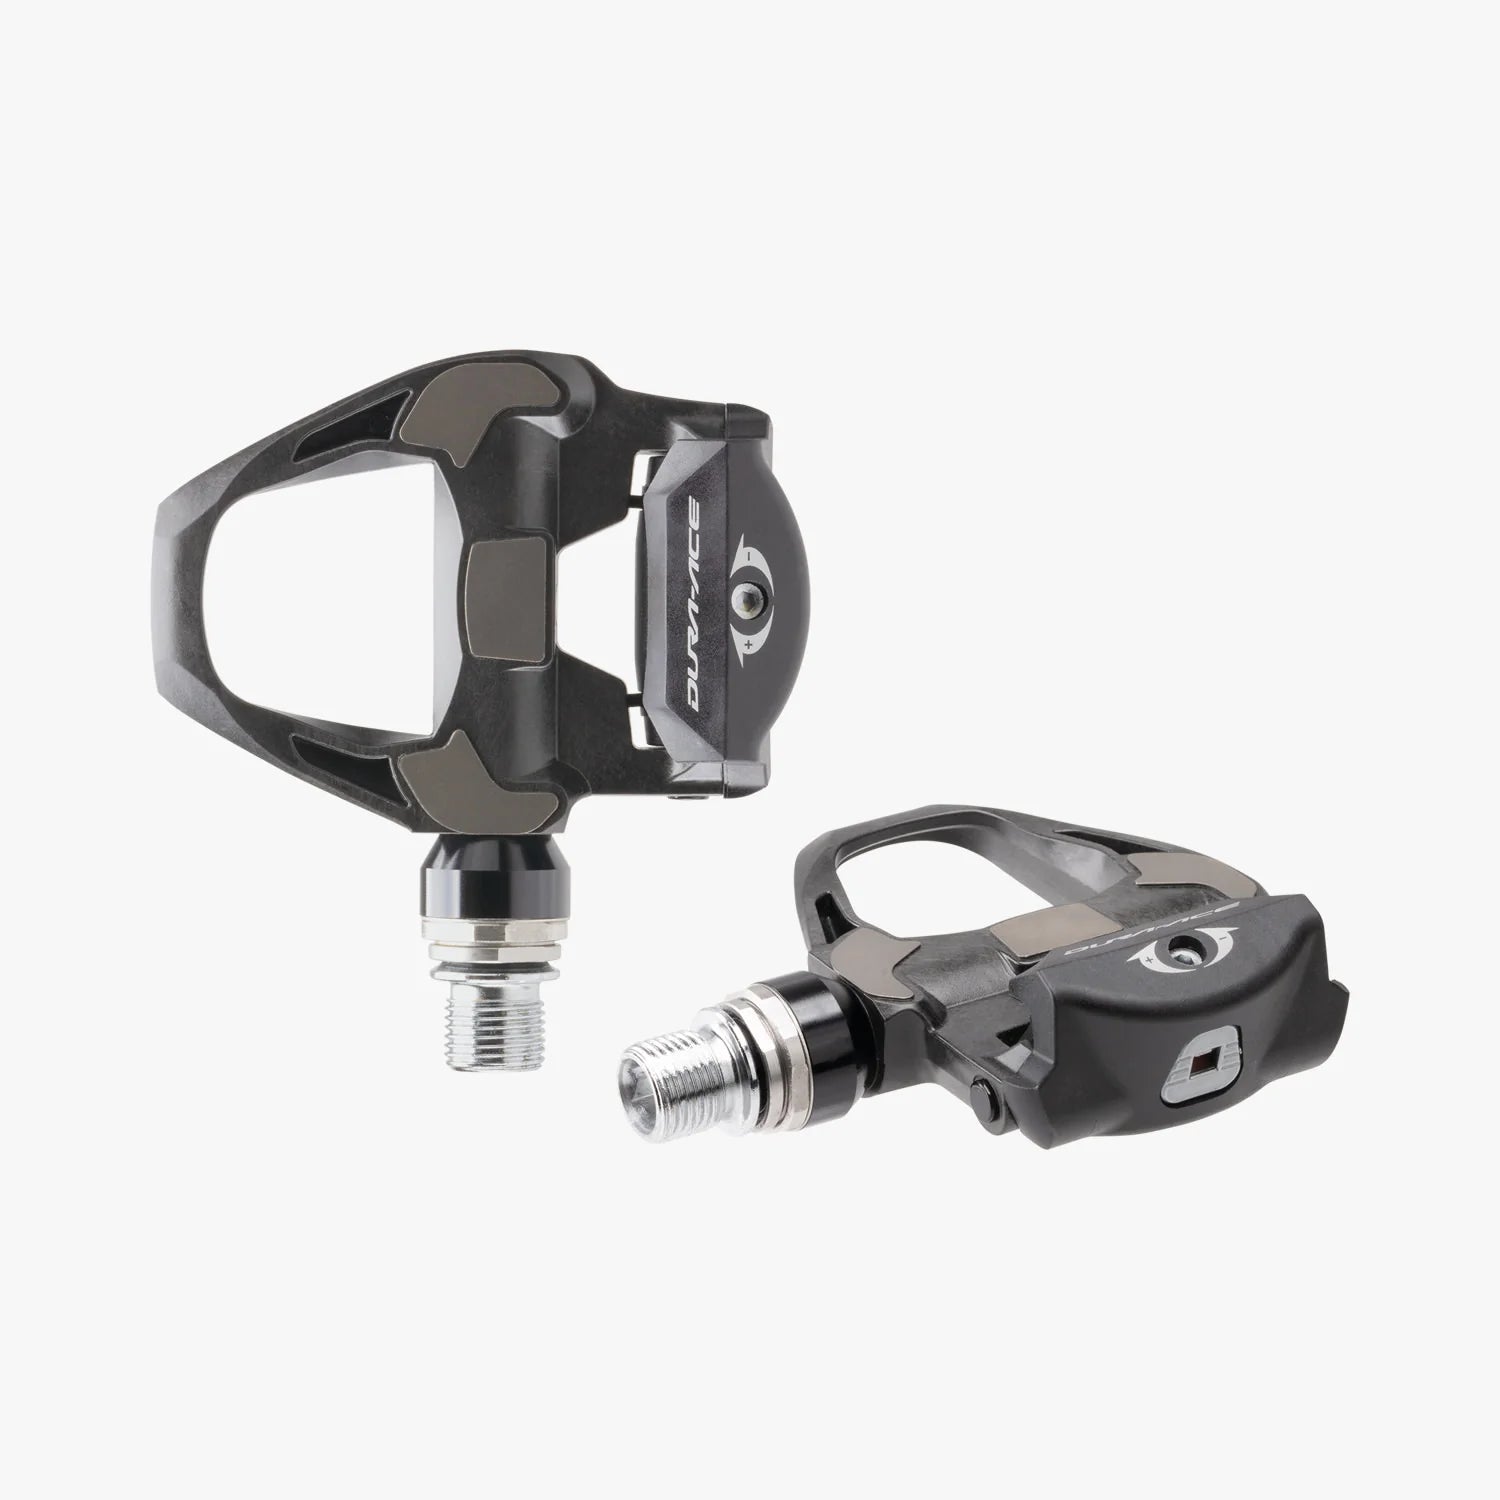 SHIMANO Dura-Ace PD-R9100 Pedals